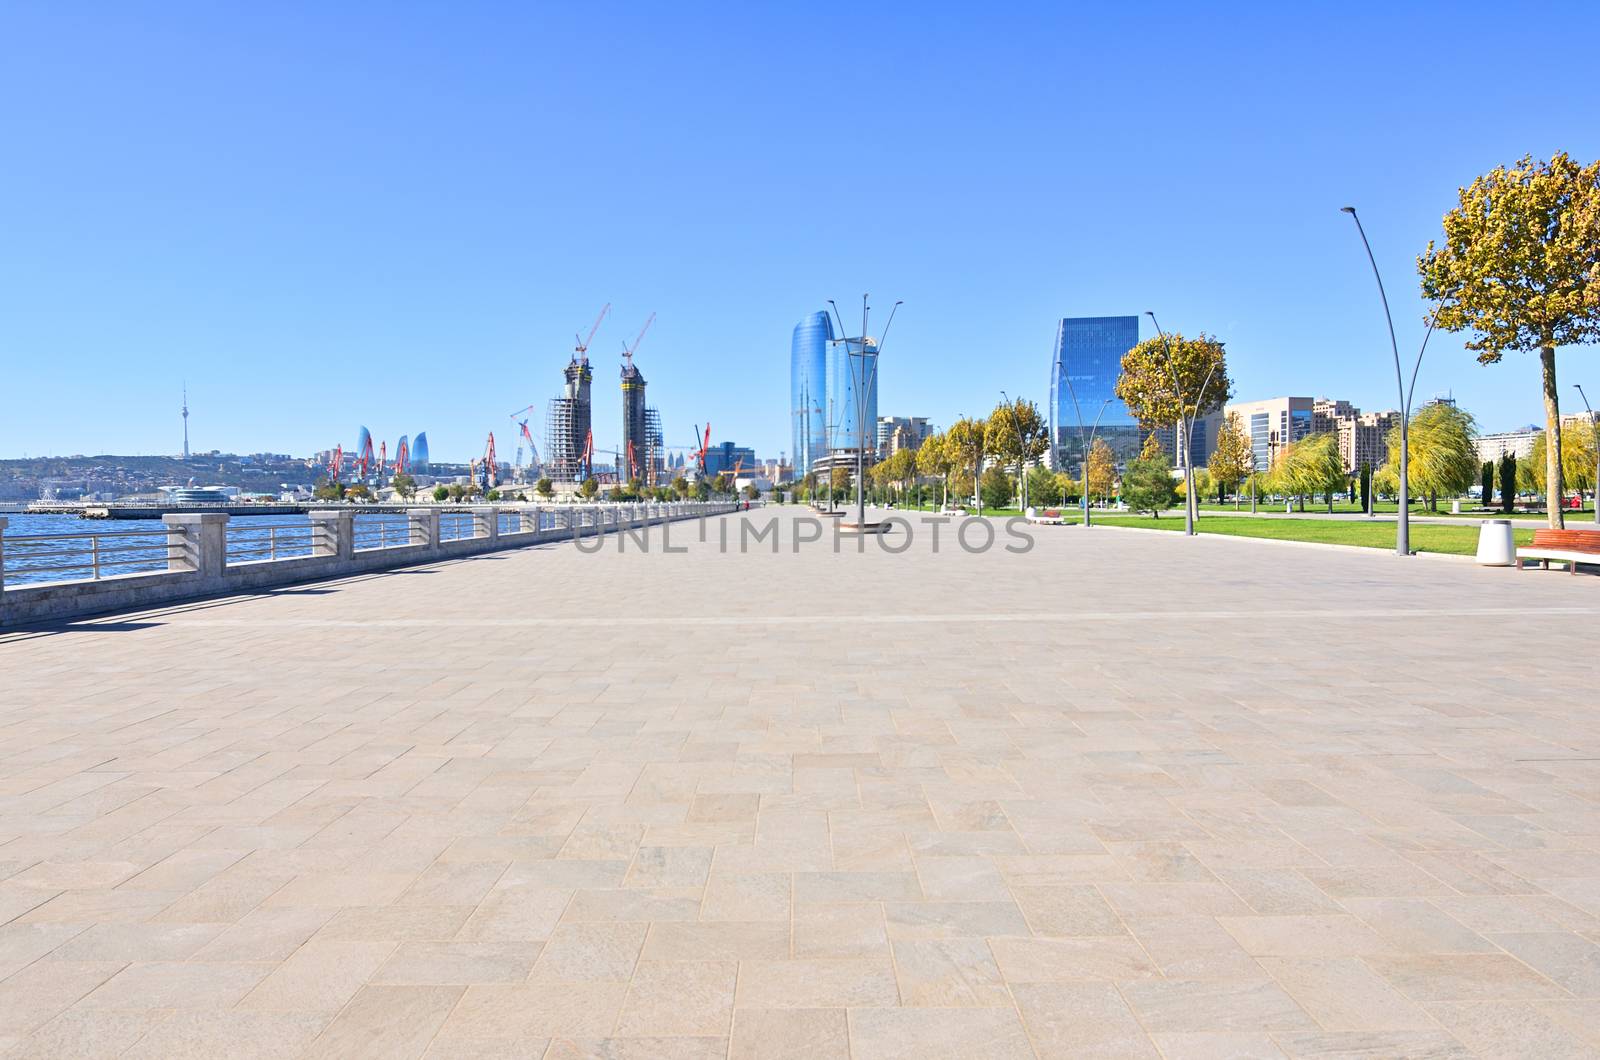 Views on parts of the city and architecture from the shores of the Caspian Sea in Baku.Azerbaijan